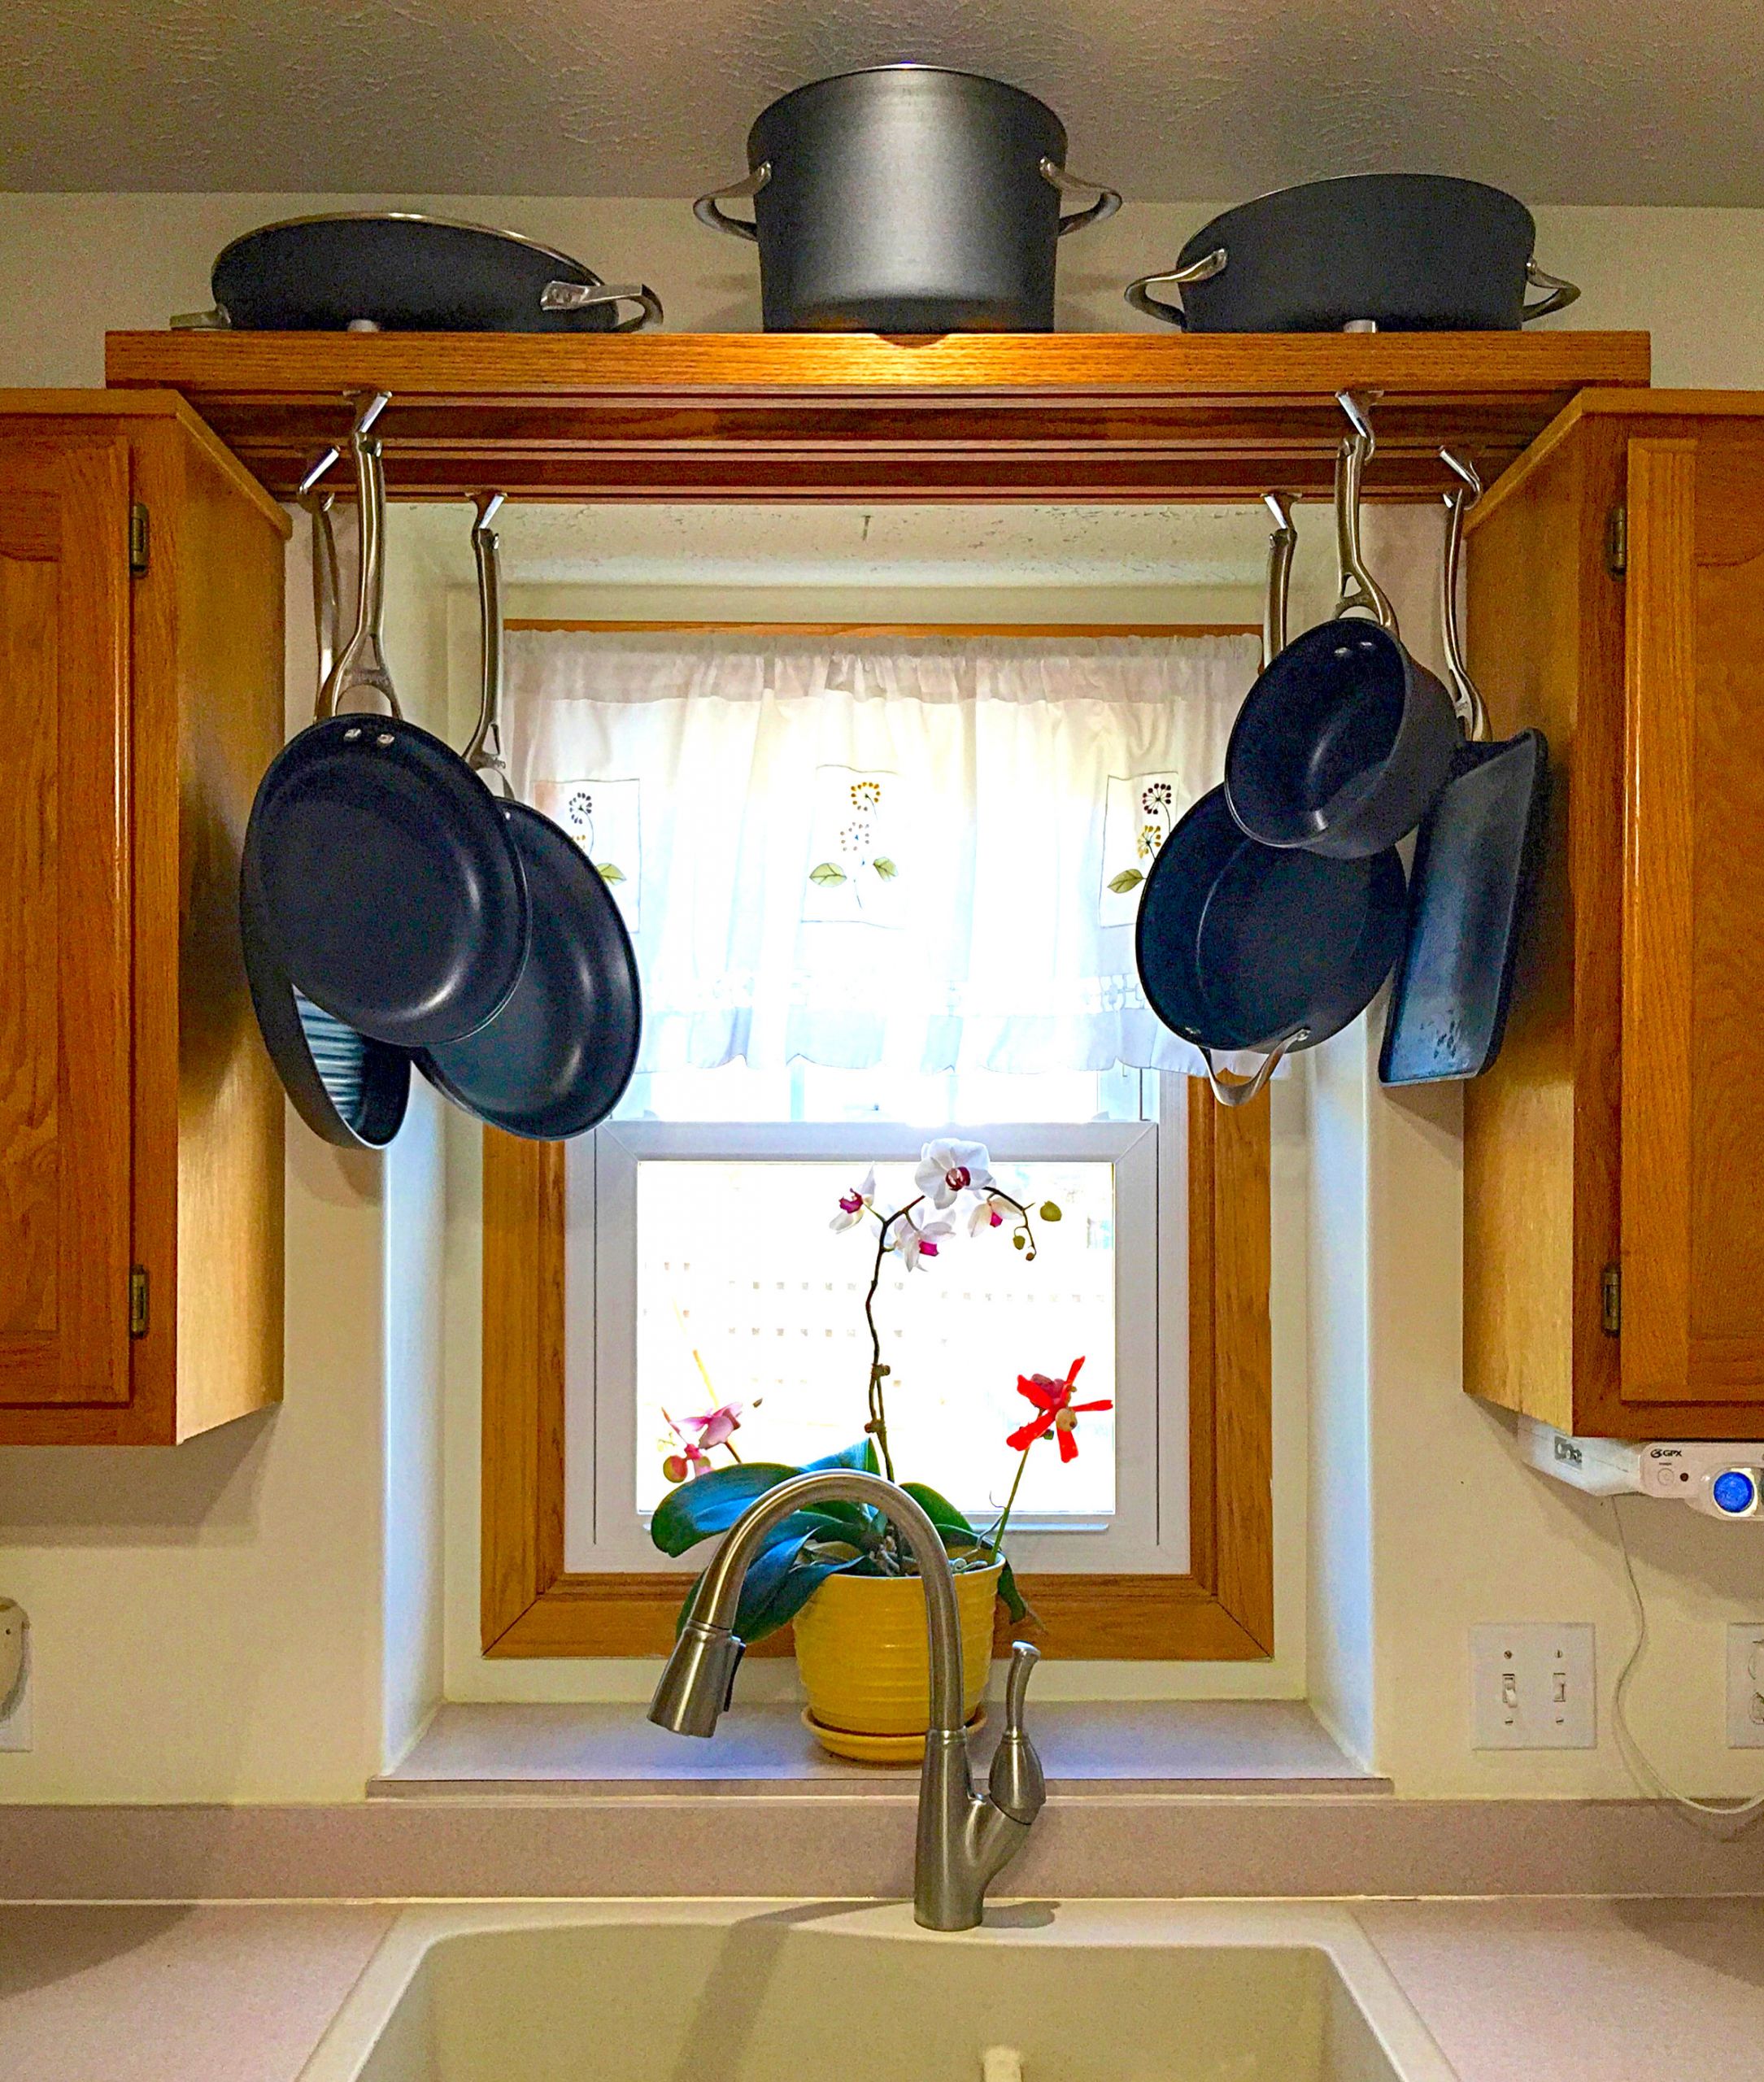 Pots And Pans Organizer DIY
 Make use of space over the kitchen sink with this DIY pot